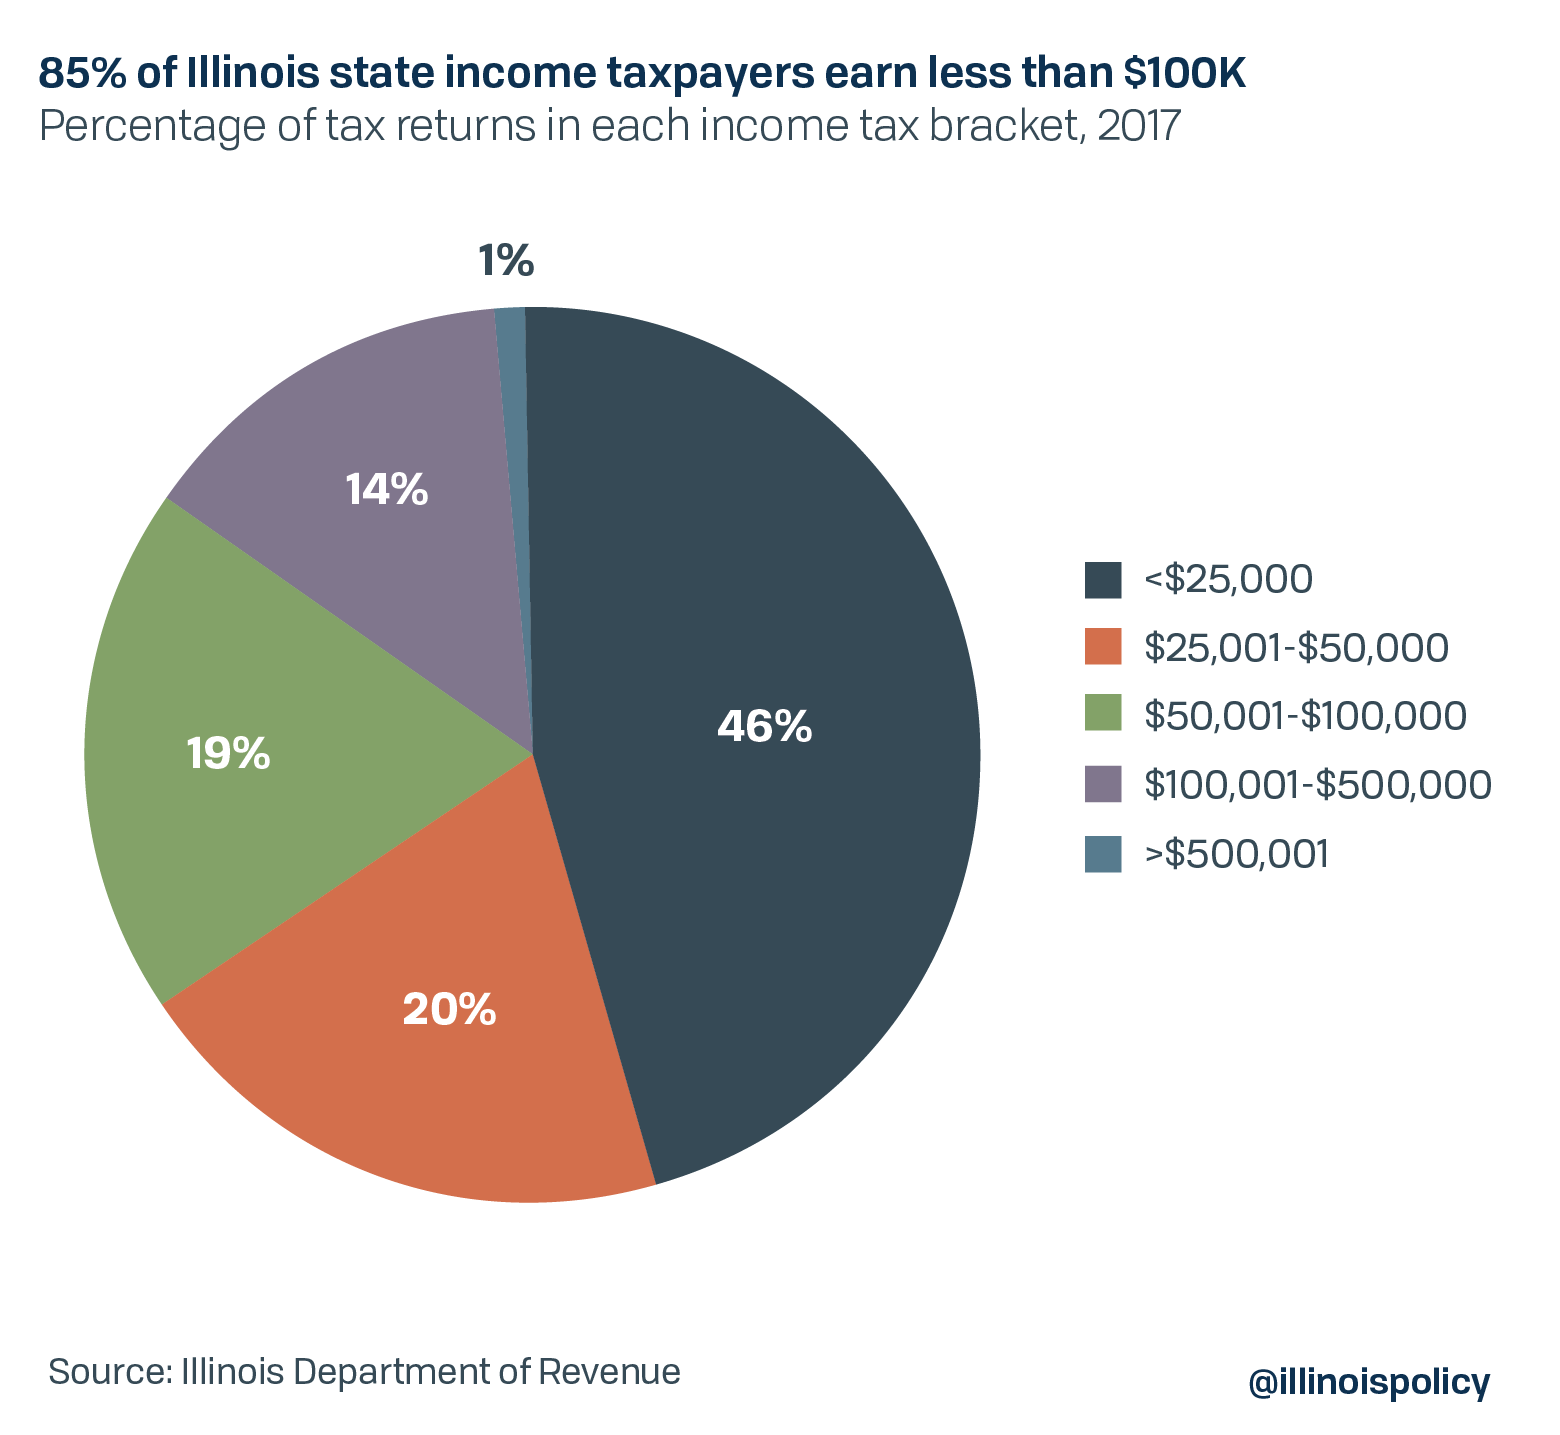 Exemptions and deductions give Illinoisans less than half